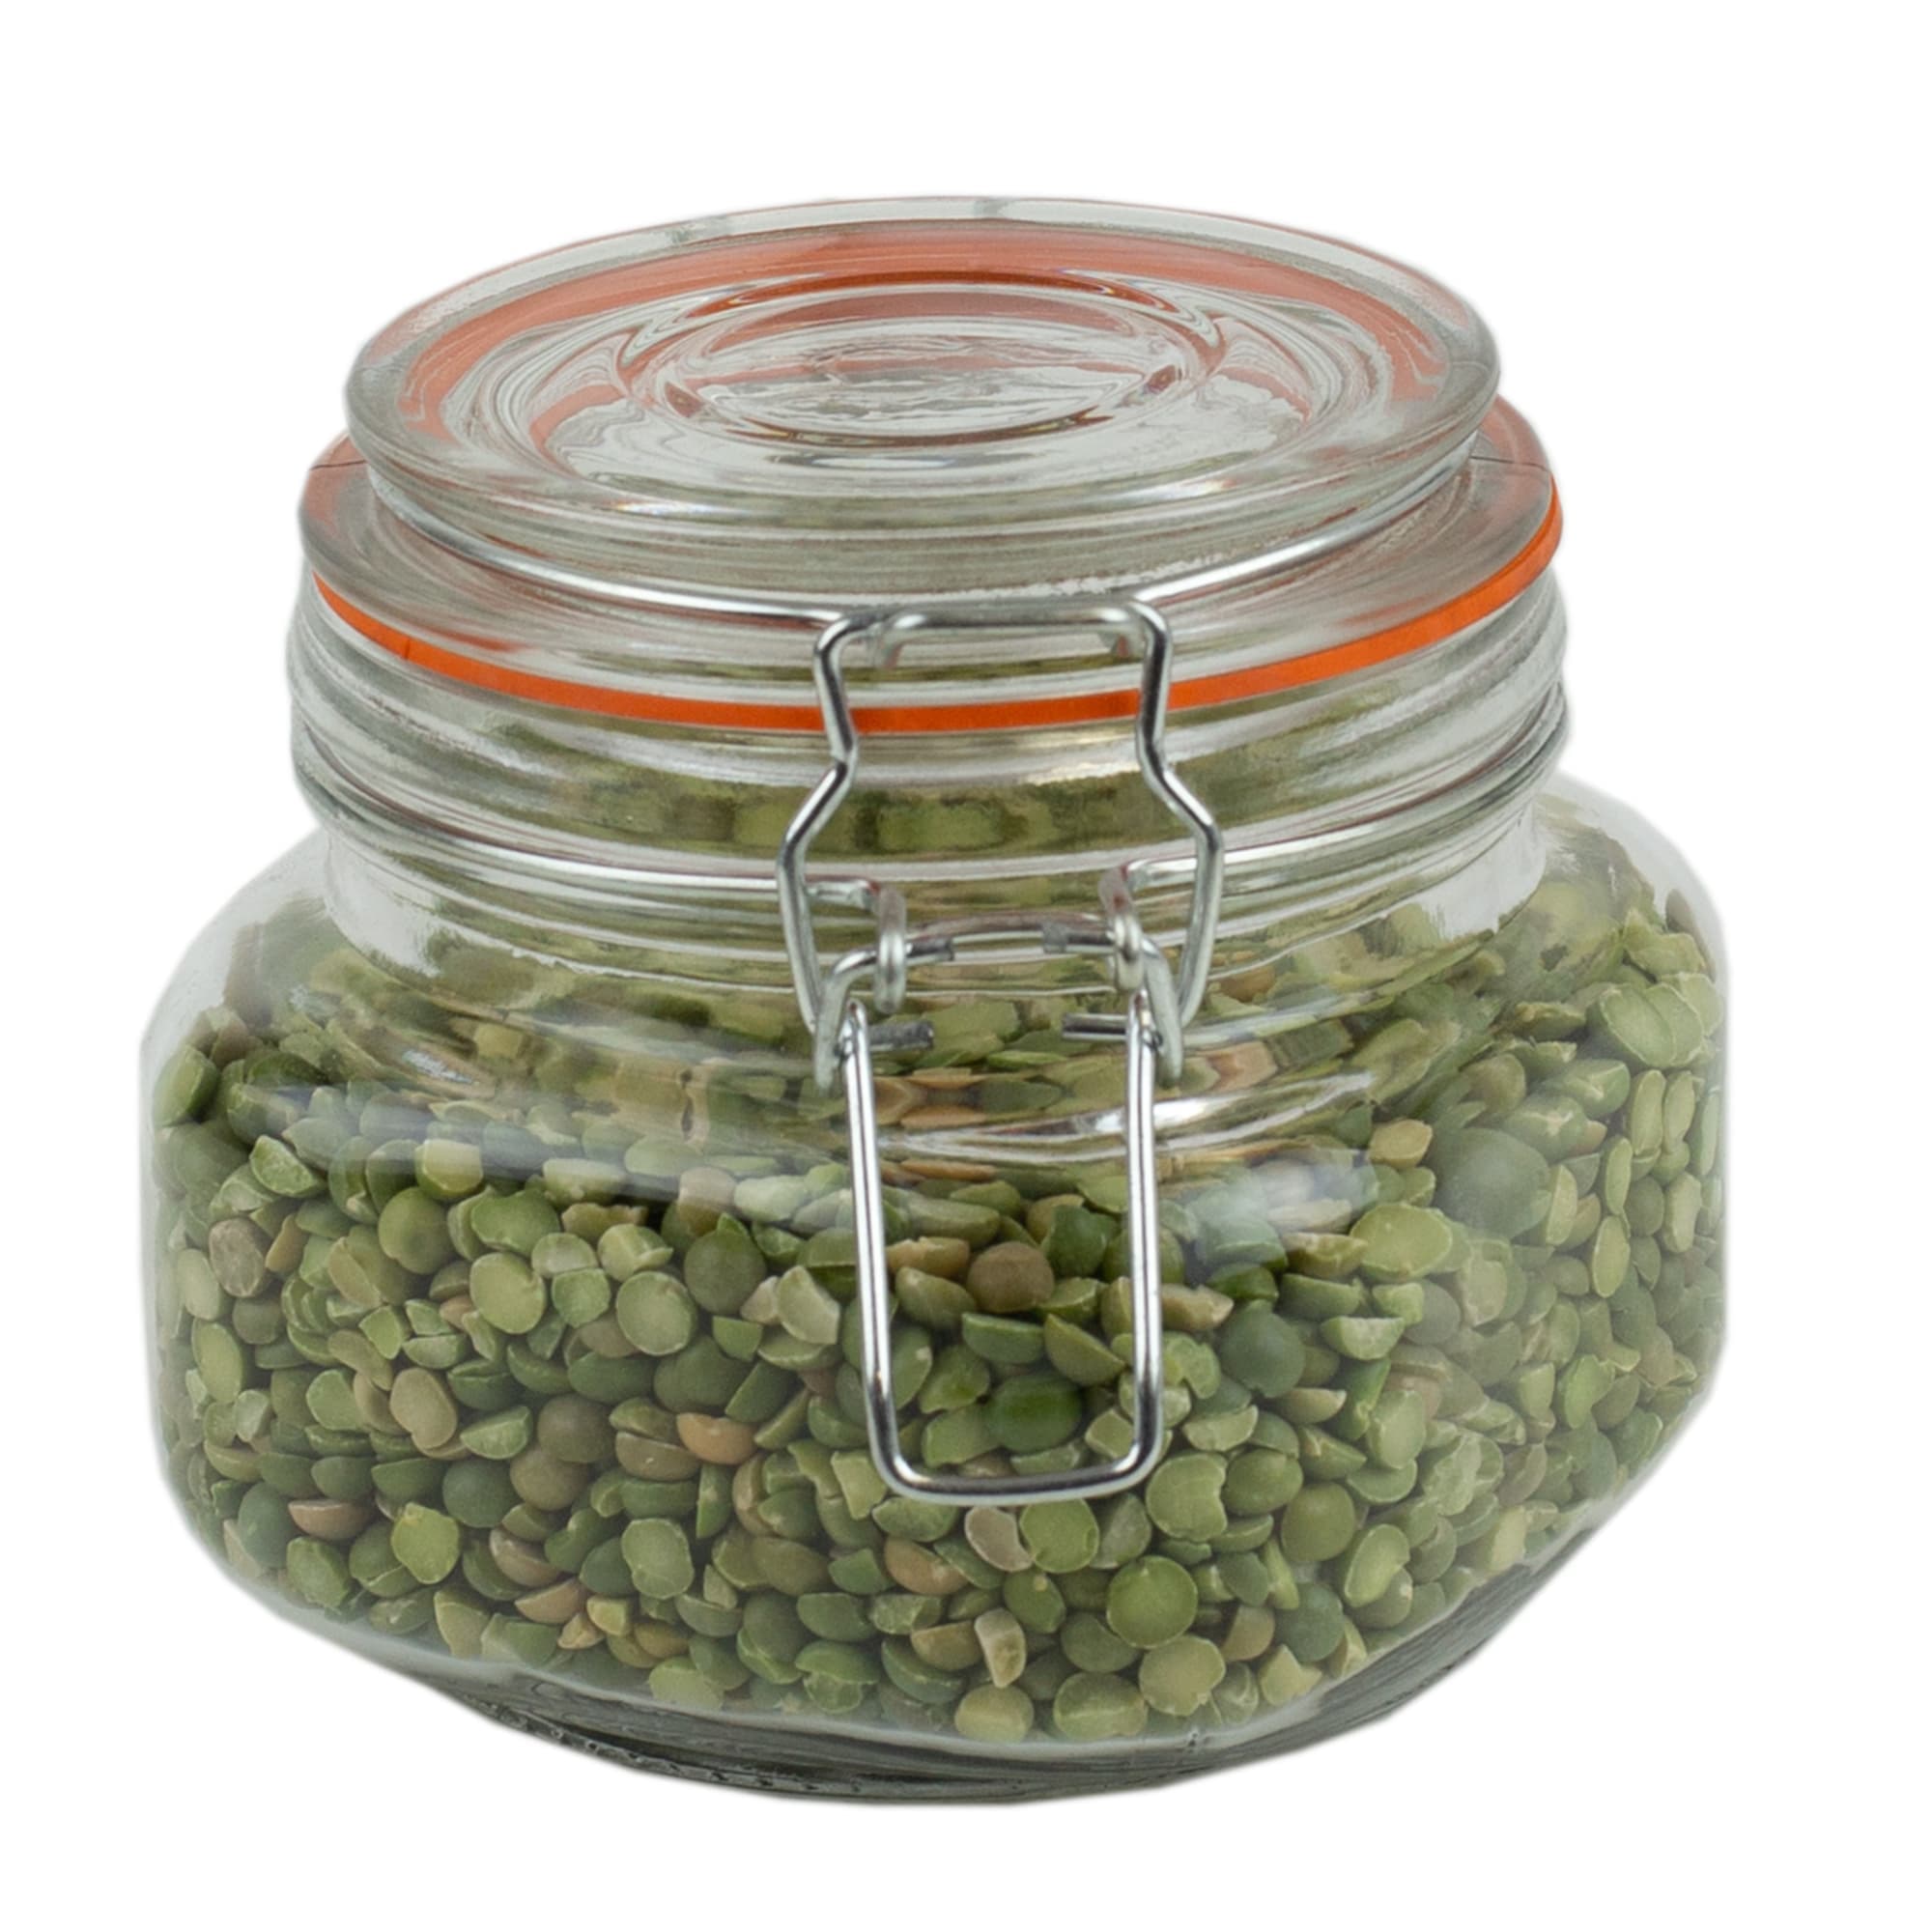 Home Basics 14 oz. Glass Pickling Jar with Wire Bail Lid and Rubber Seal Gasket $2.50 EACH, CASE PACK OF 12